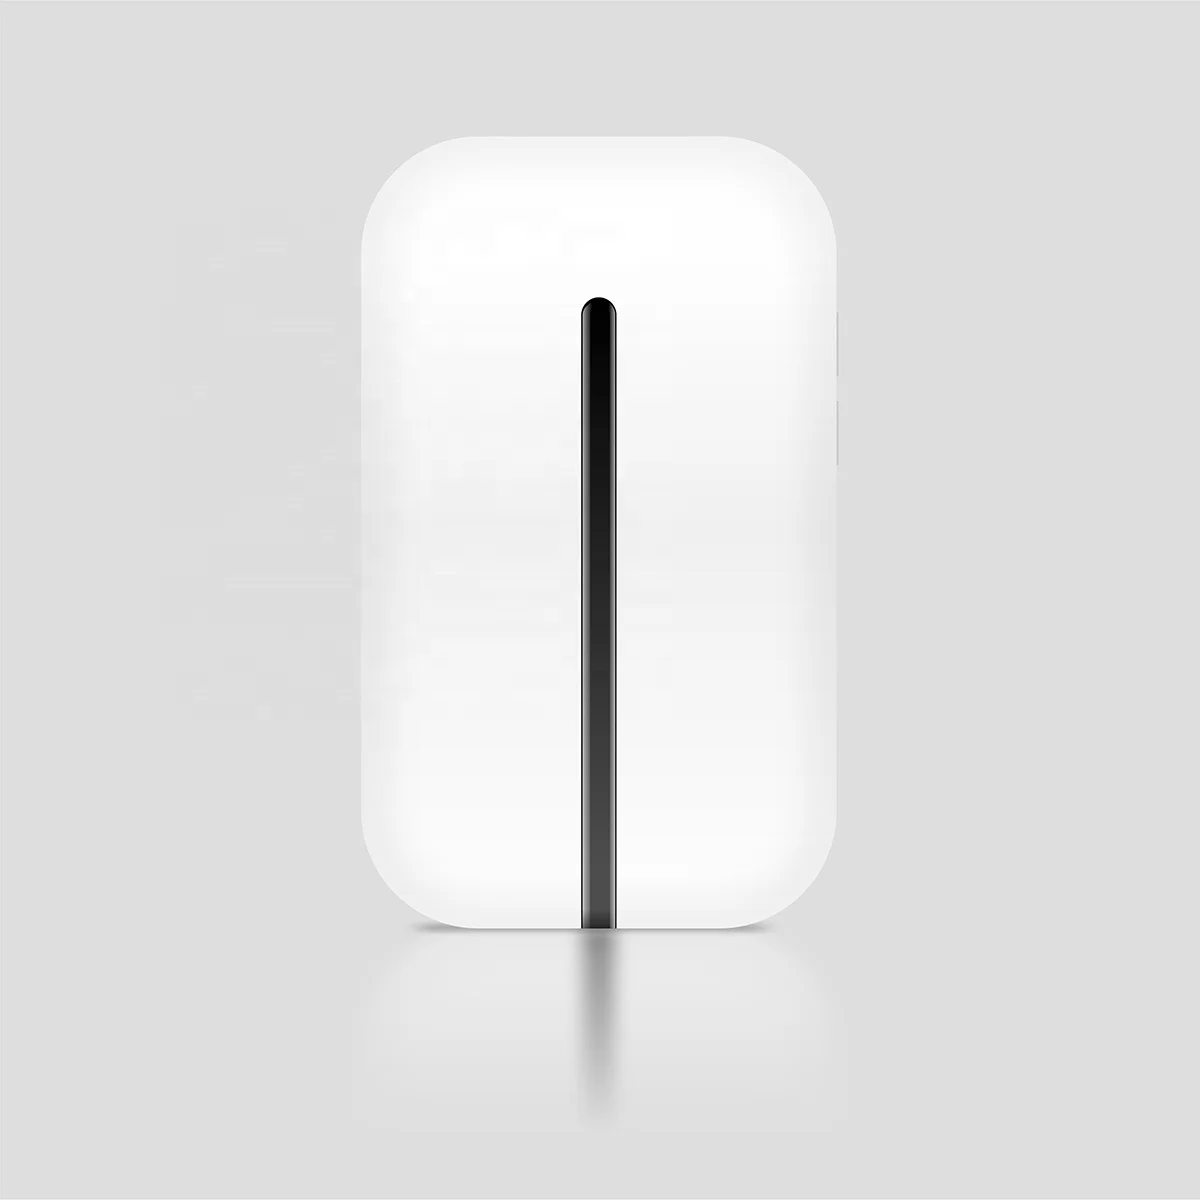 esim mifis router mifis 4g lte router sim card cpe router pocket hotspot portable wifi with battery